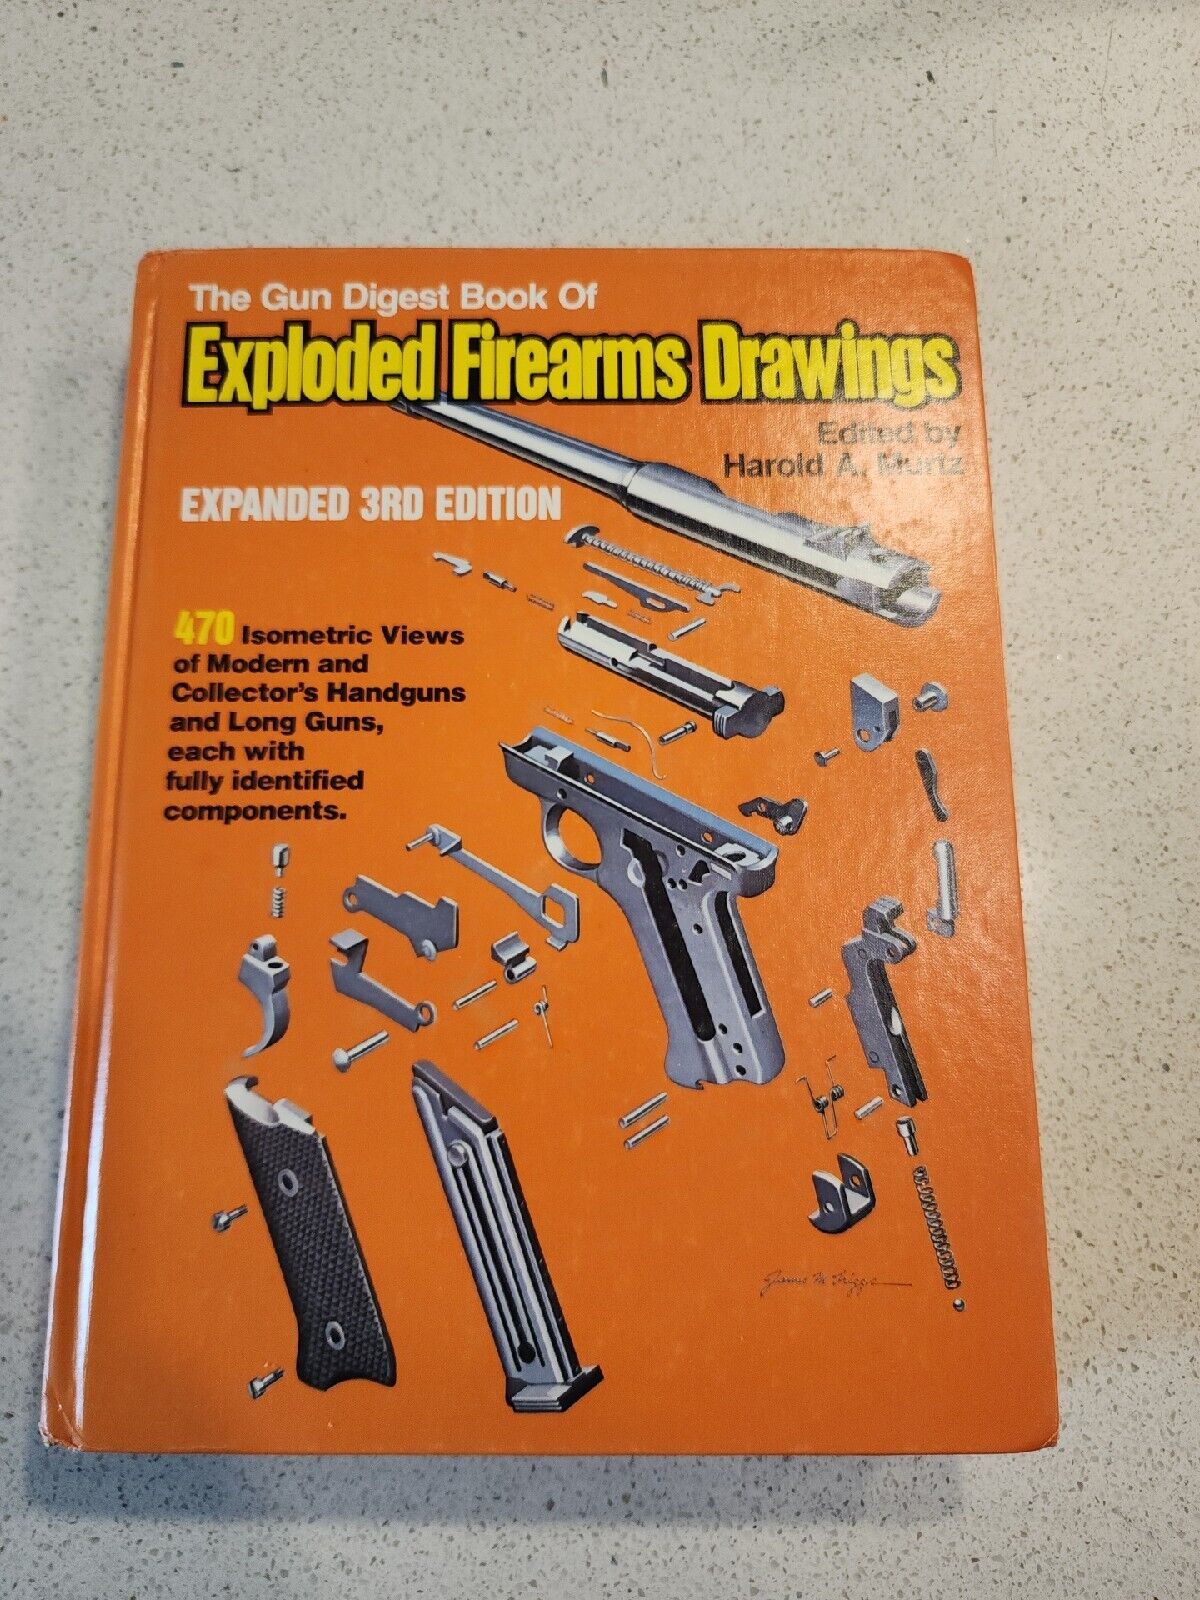 GUN DIGEST BOOK OF EXPLODED FIREARMS DRAWINGS 3RD